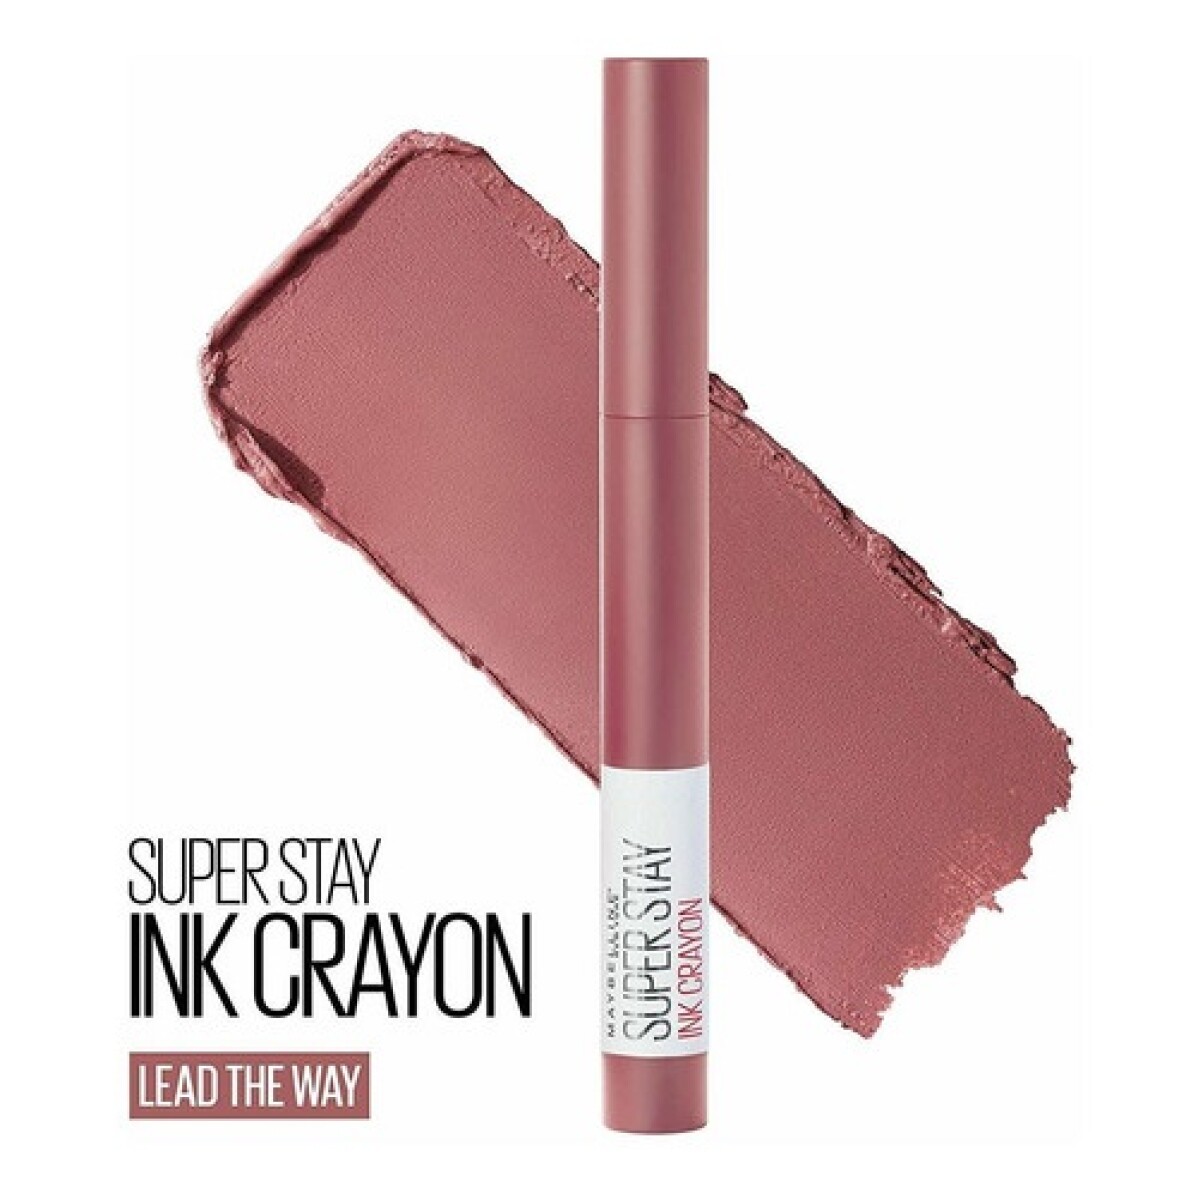 Labial Maybelline Sup. Stay Ink Crayon Lead The Way 1,2 Grs. 